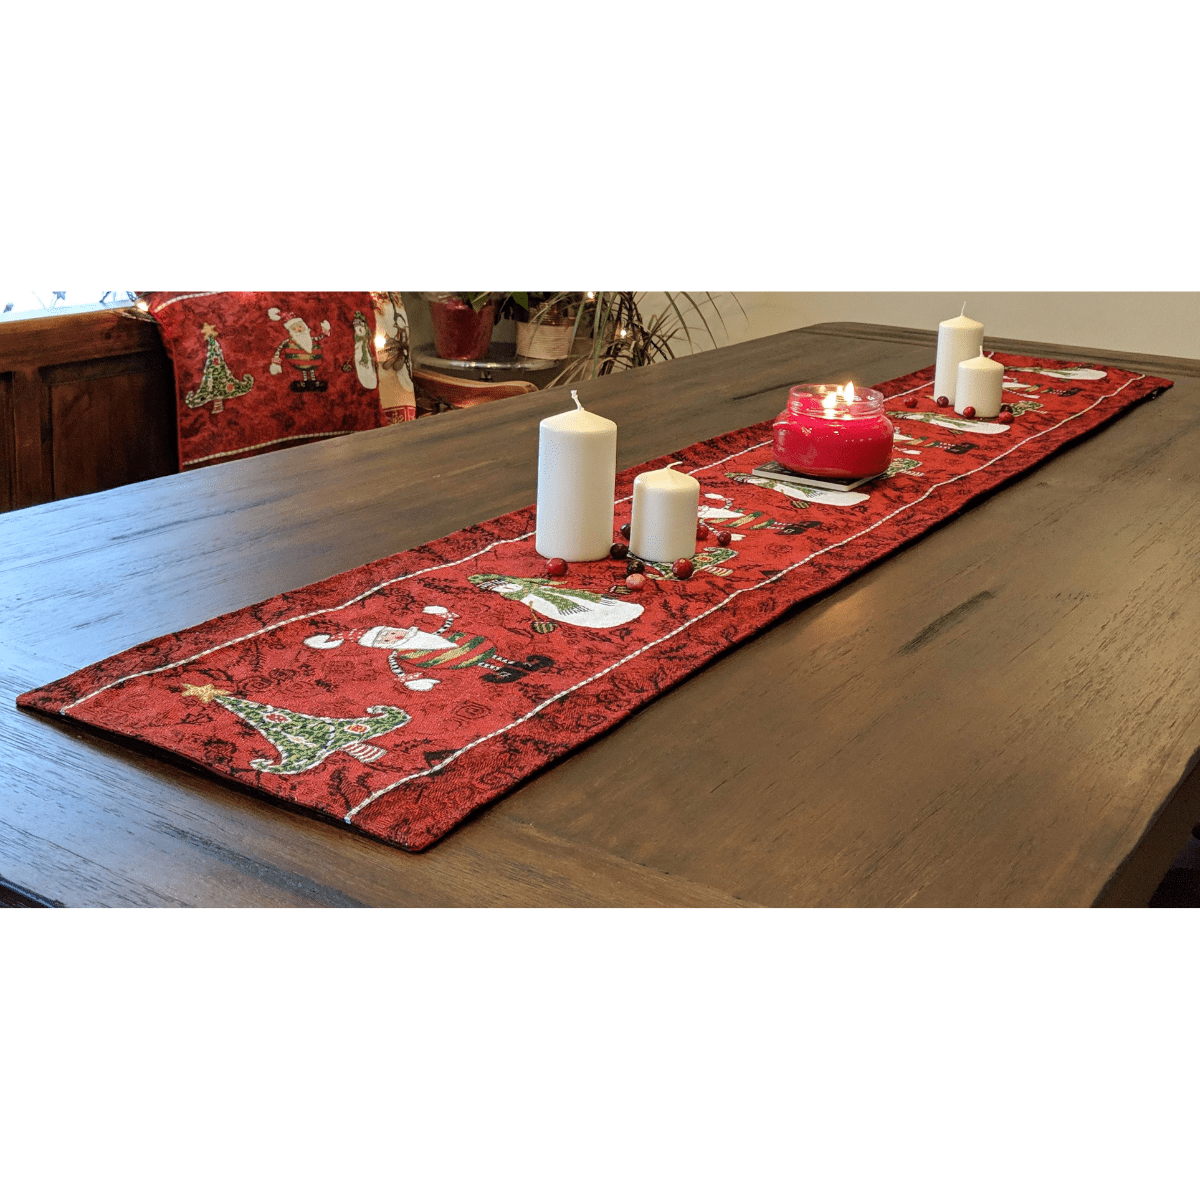 Tache Here Comes Santa Claus Vintage Holiday Woven Tapestry Table Runners (8577TR) - Tache Home Fashion